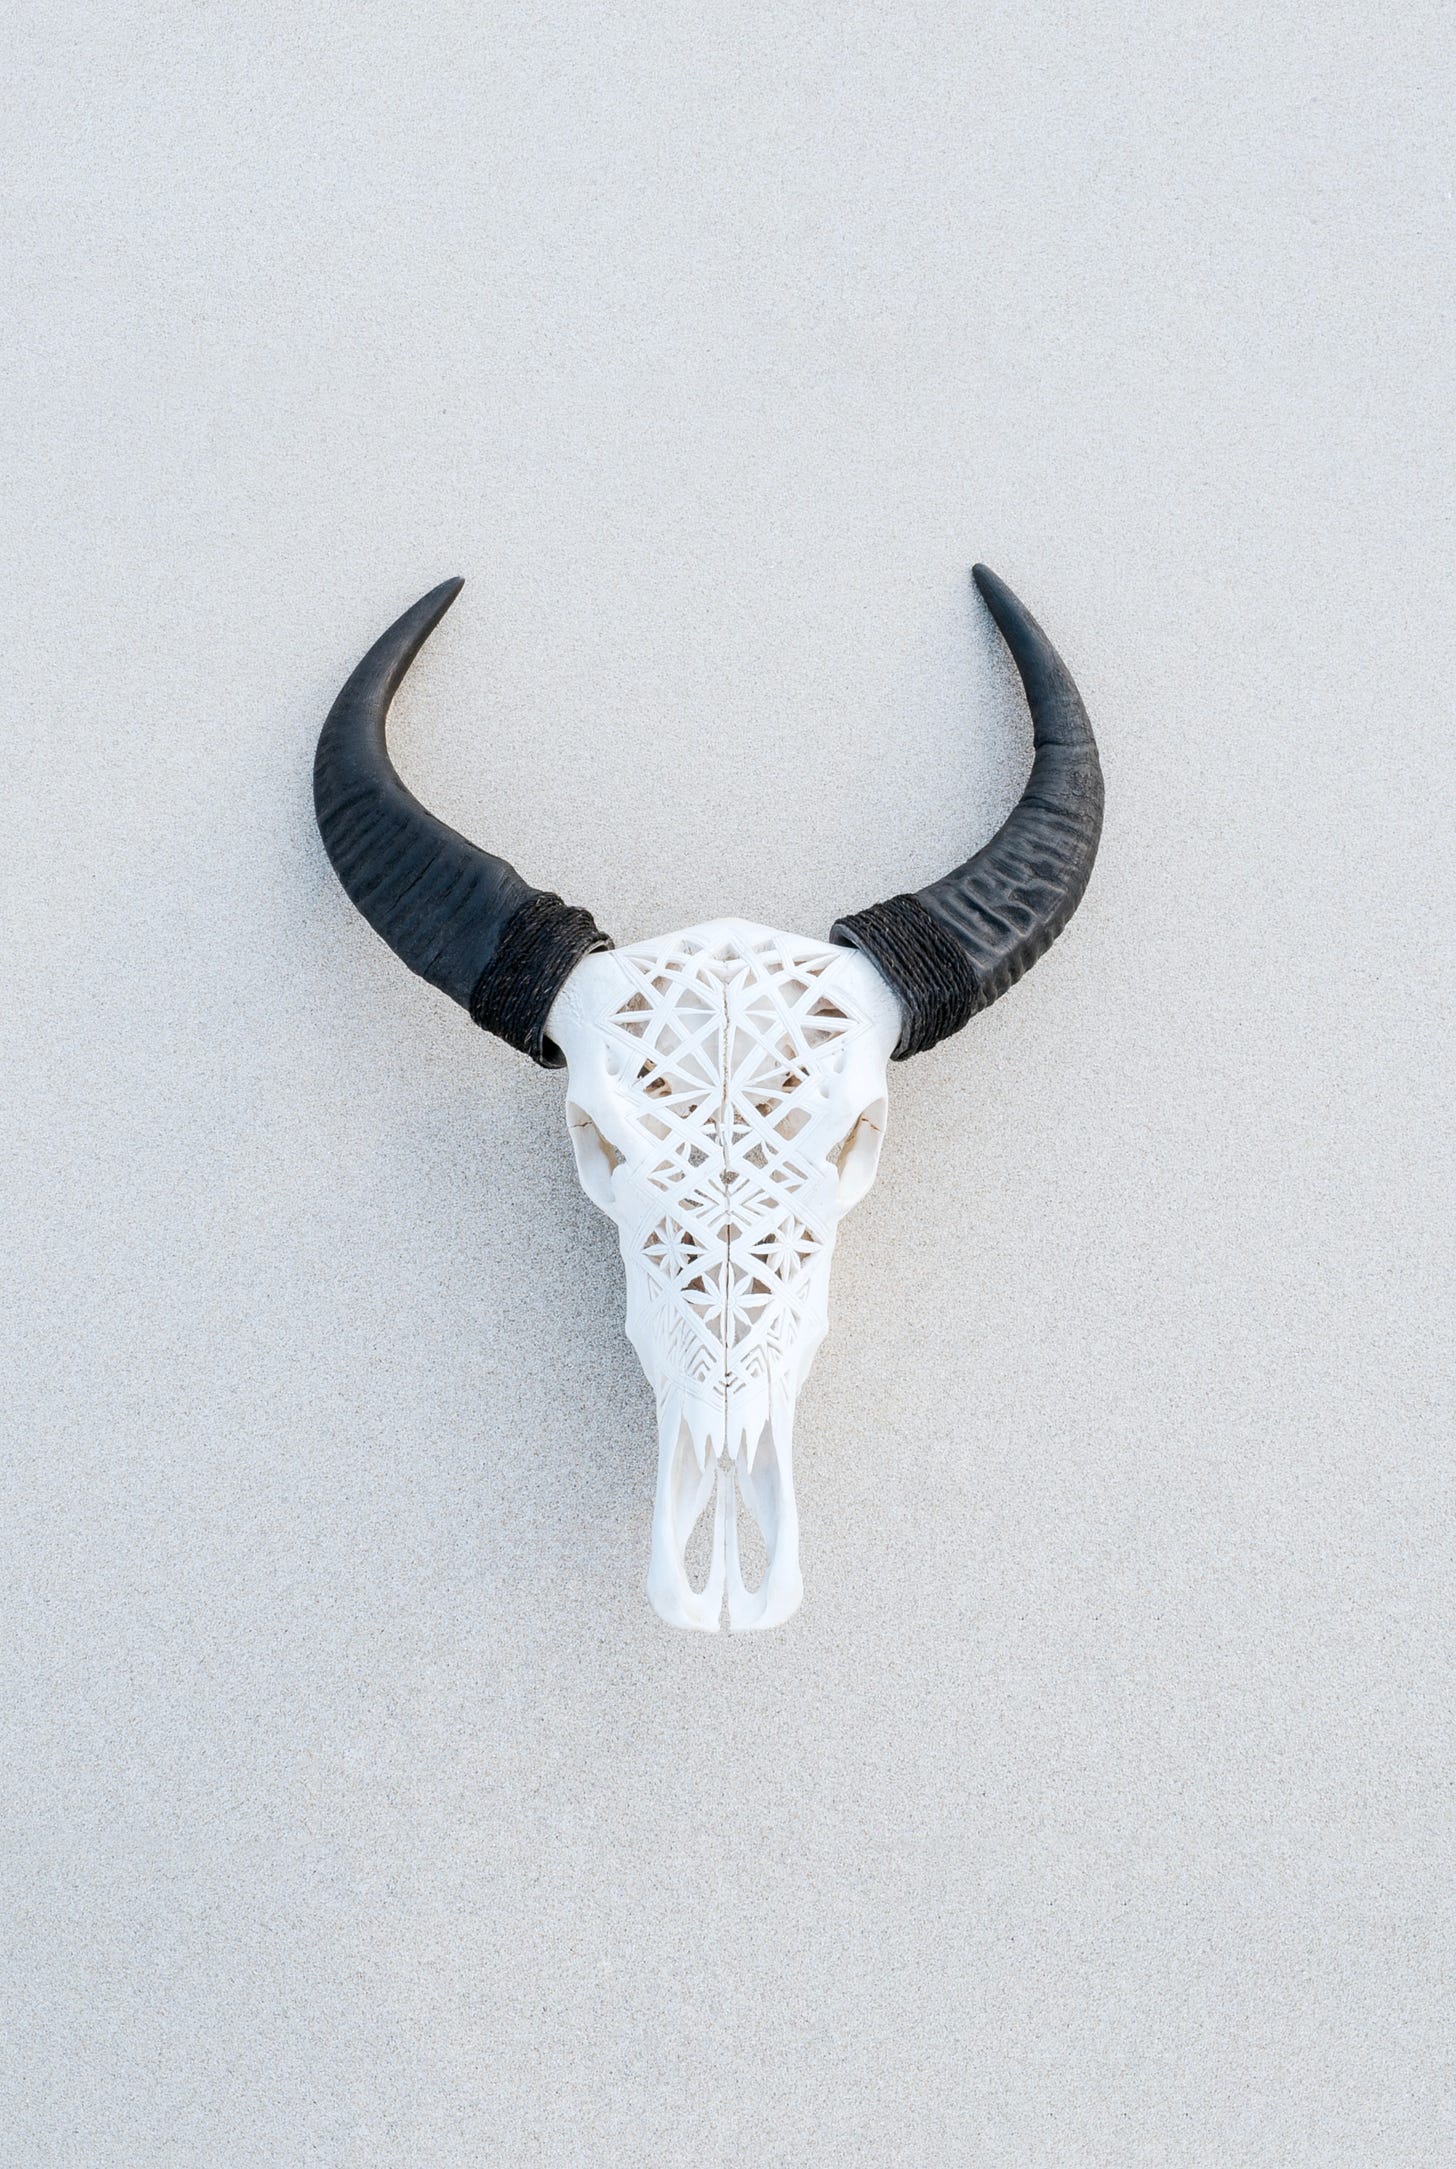 A die cut skull sculpture with black horns mounted on a textured beige wall